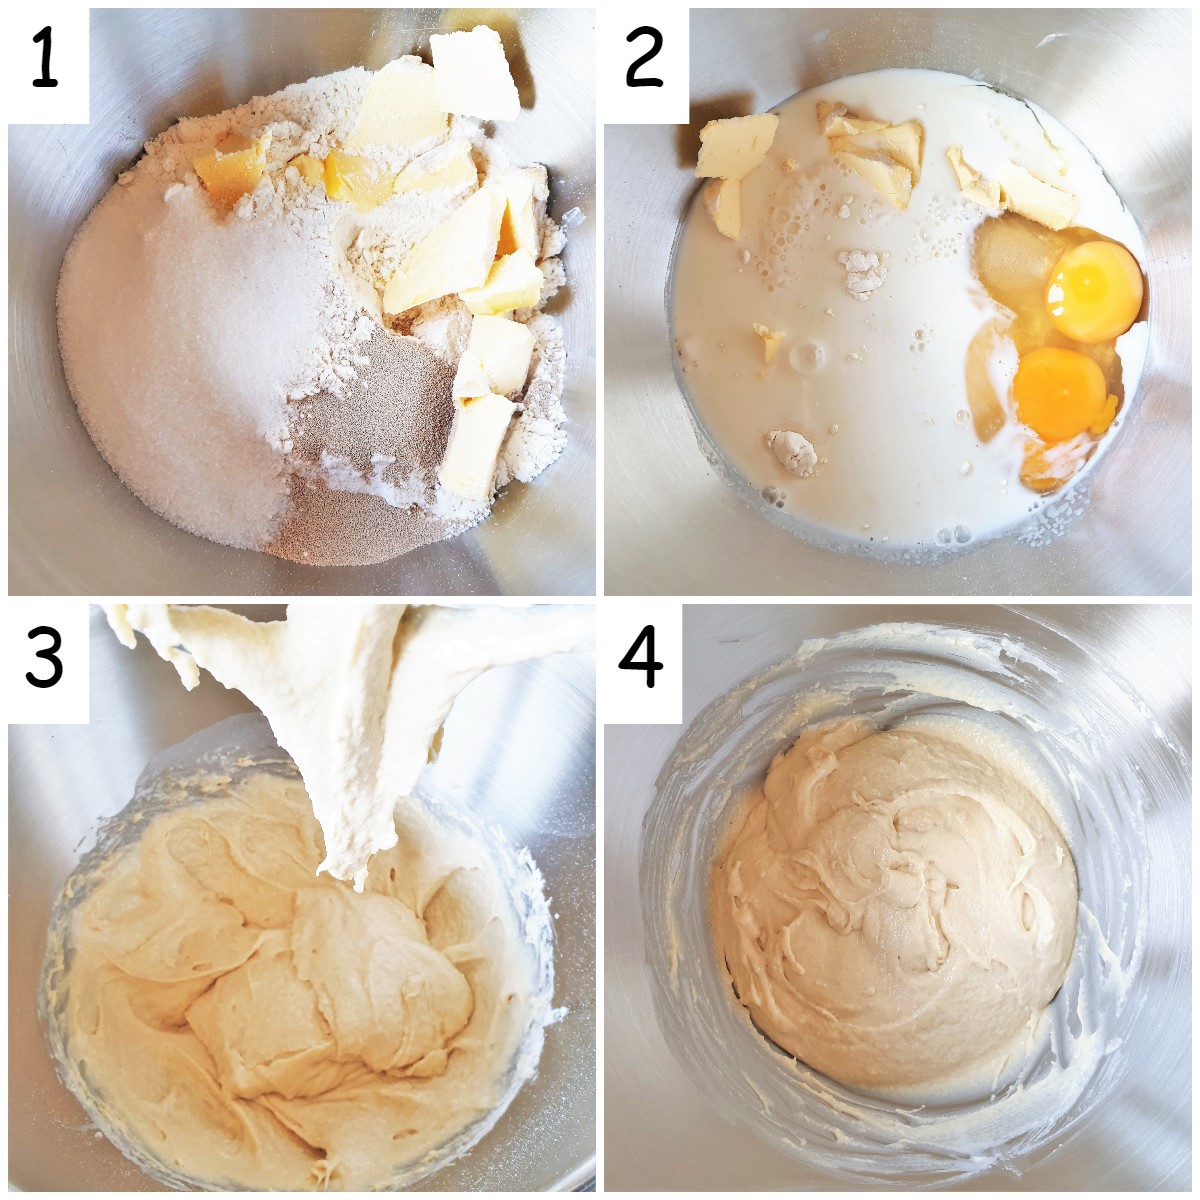 Steps for mixing the batter.